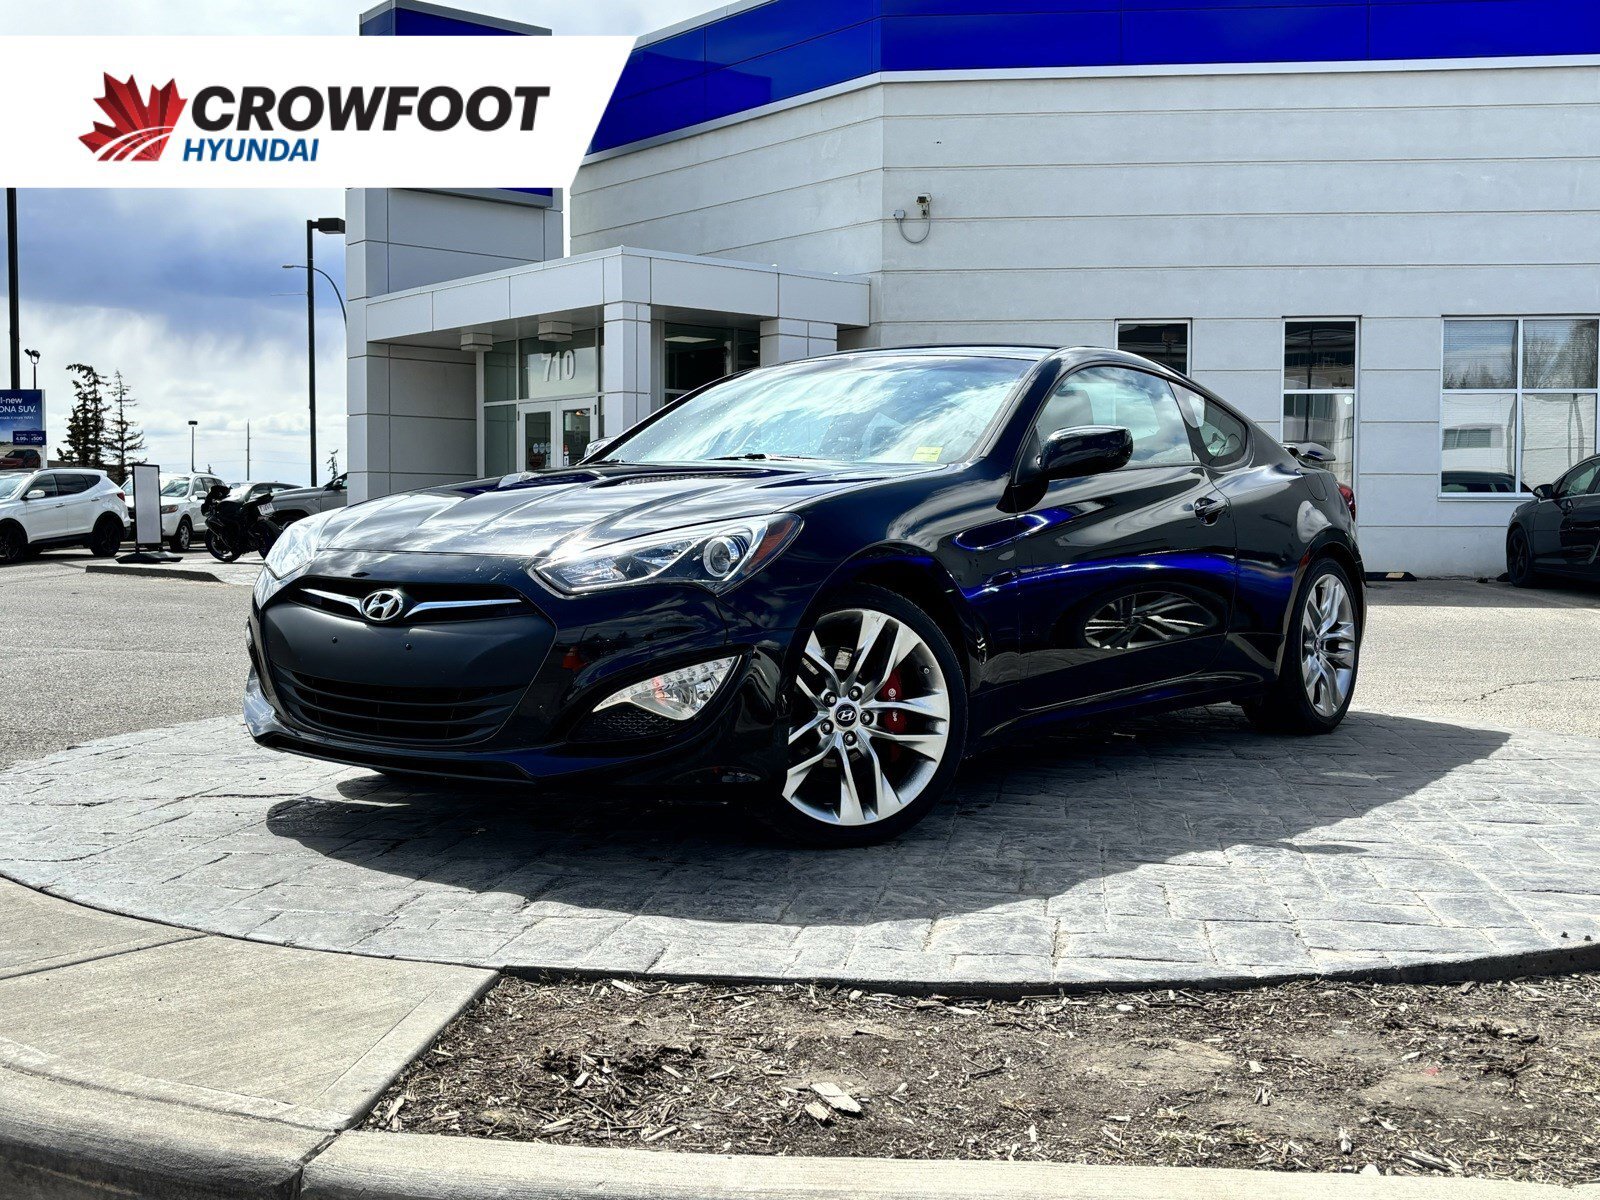 2016 Hyundai Genesis Coupe R-Spec - Manual, Low KM, No Accidents, One Owner